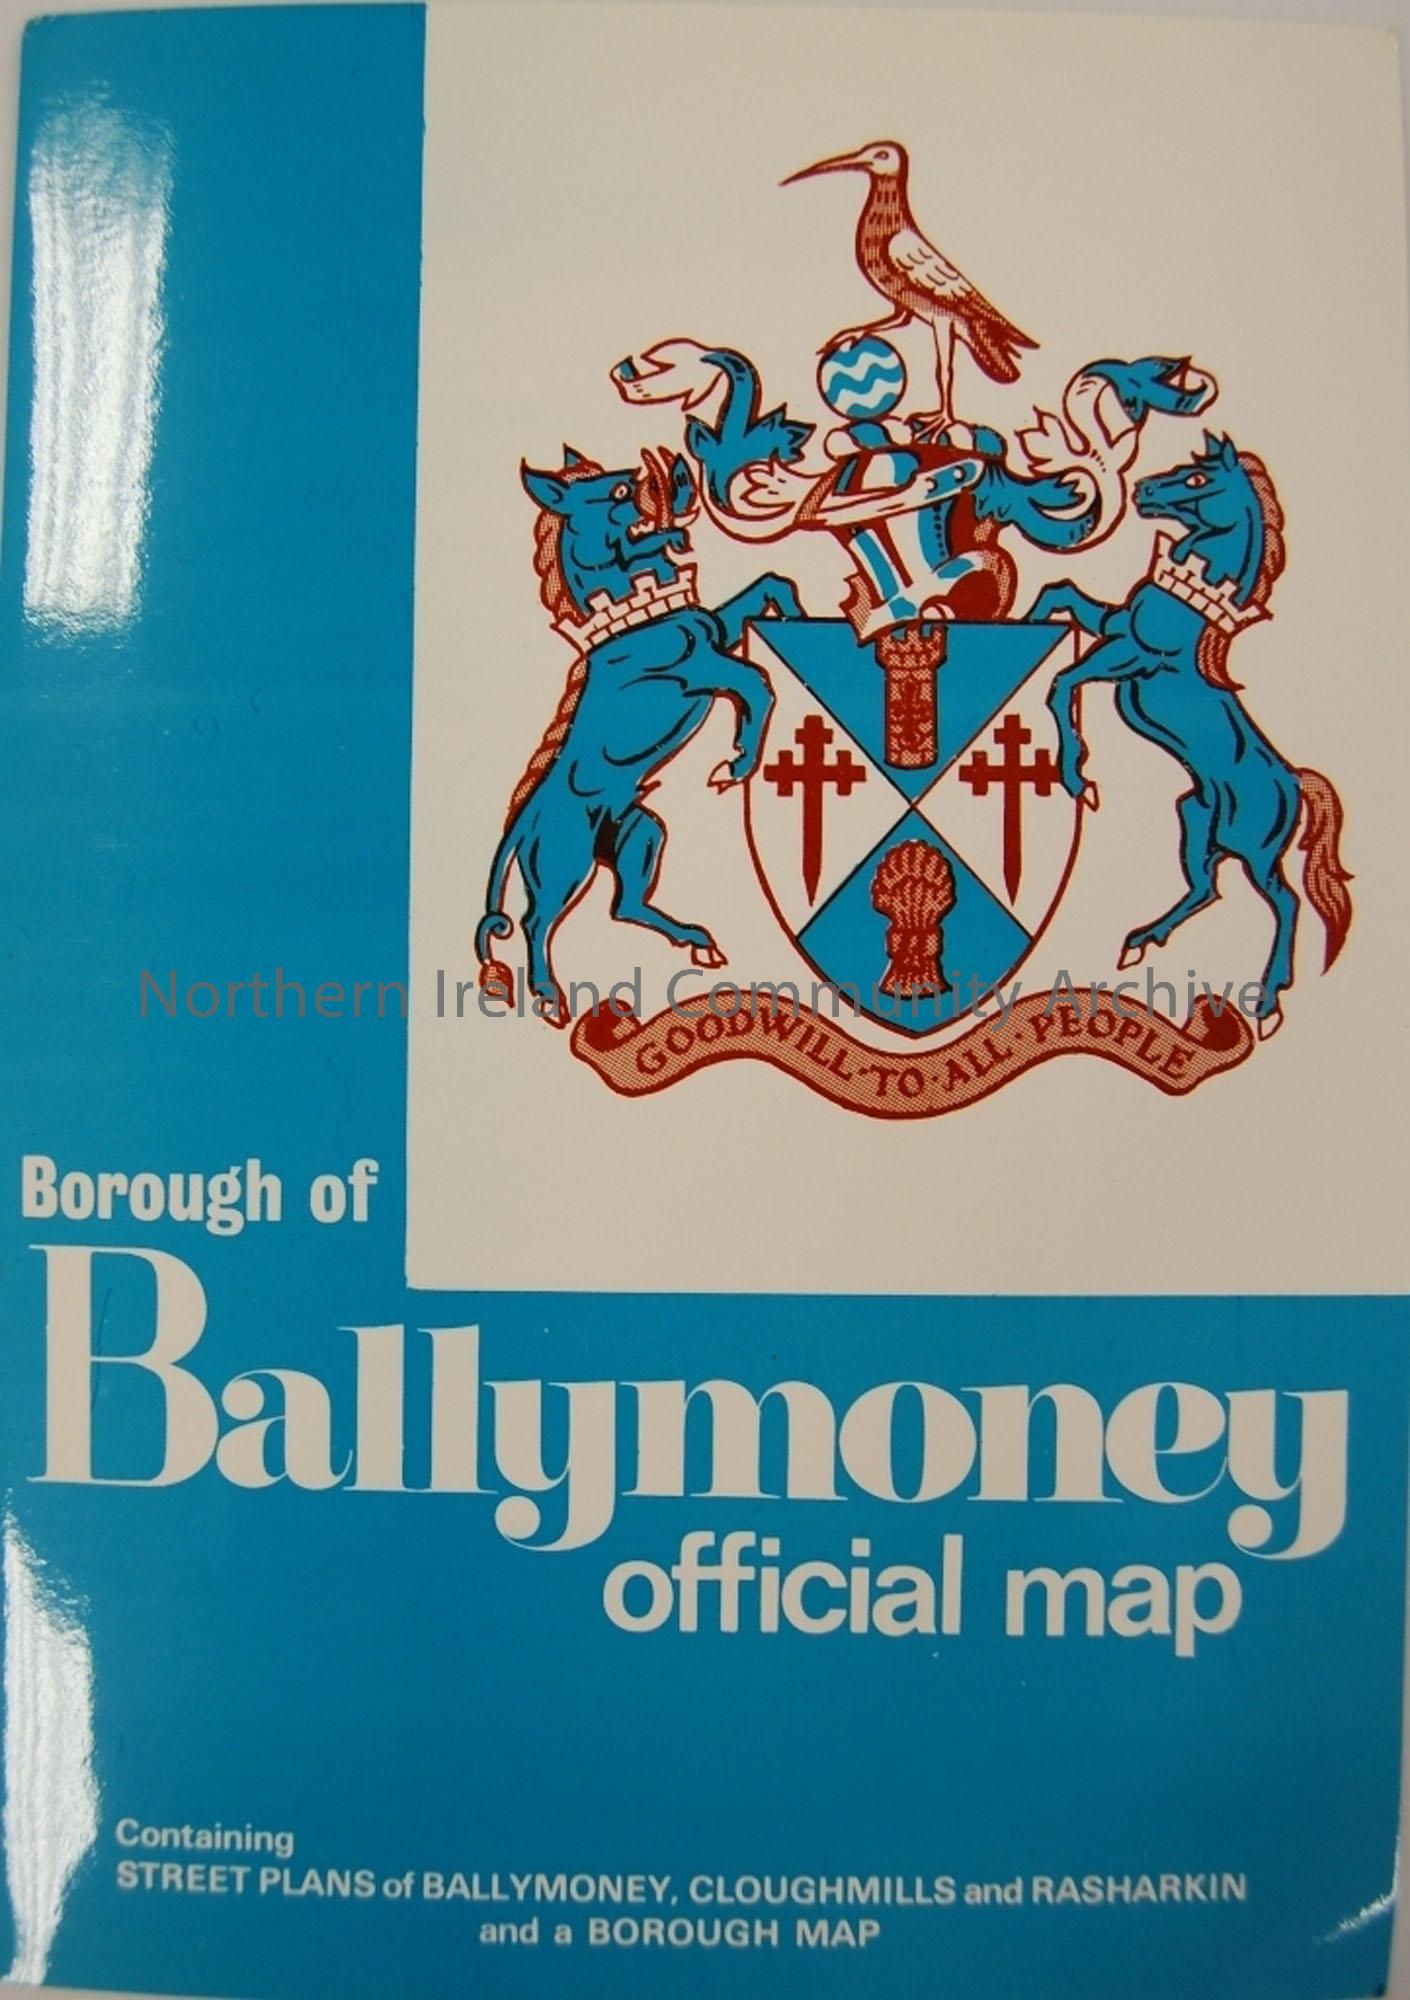 Borough of Ballymoney official map and guide. Containing street plans of Ballymoney, Cloughmills and Rasharkin and a Borough Map.